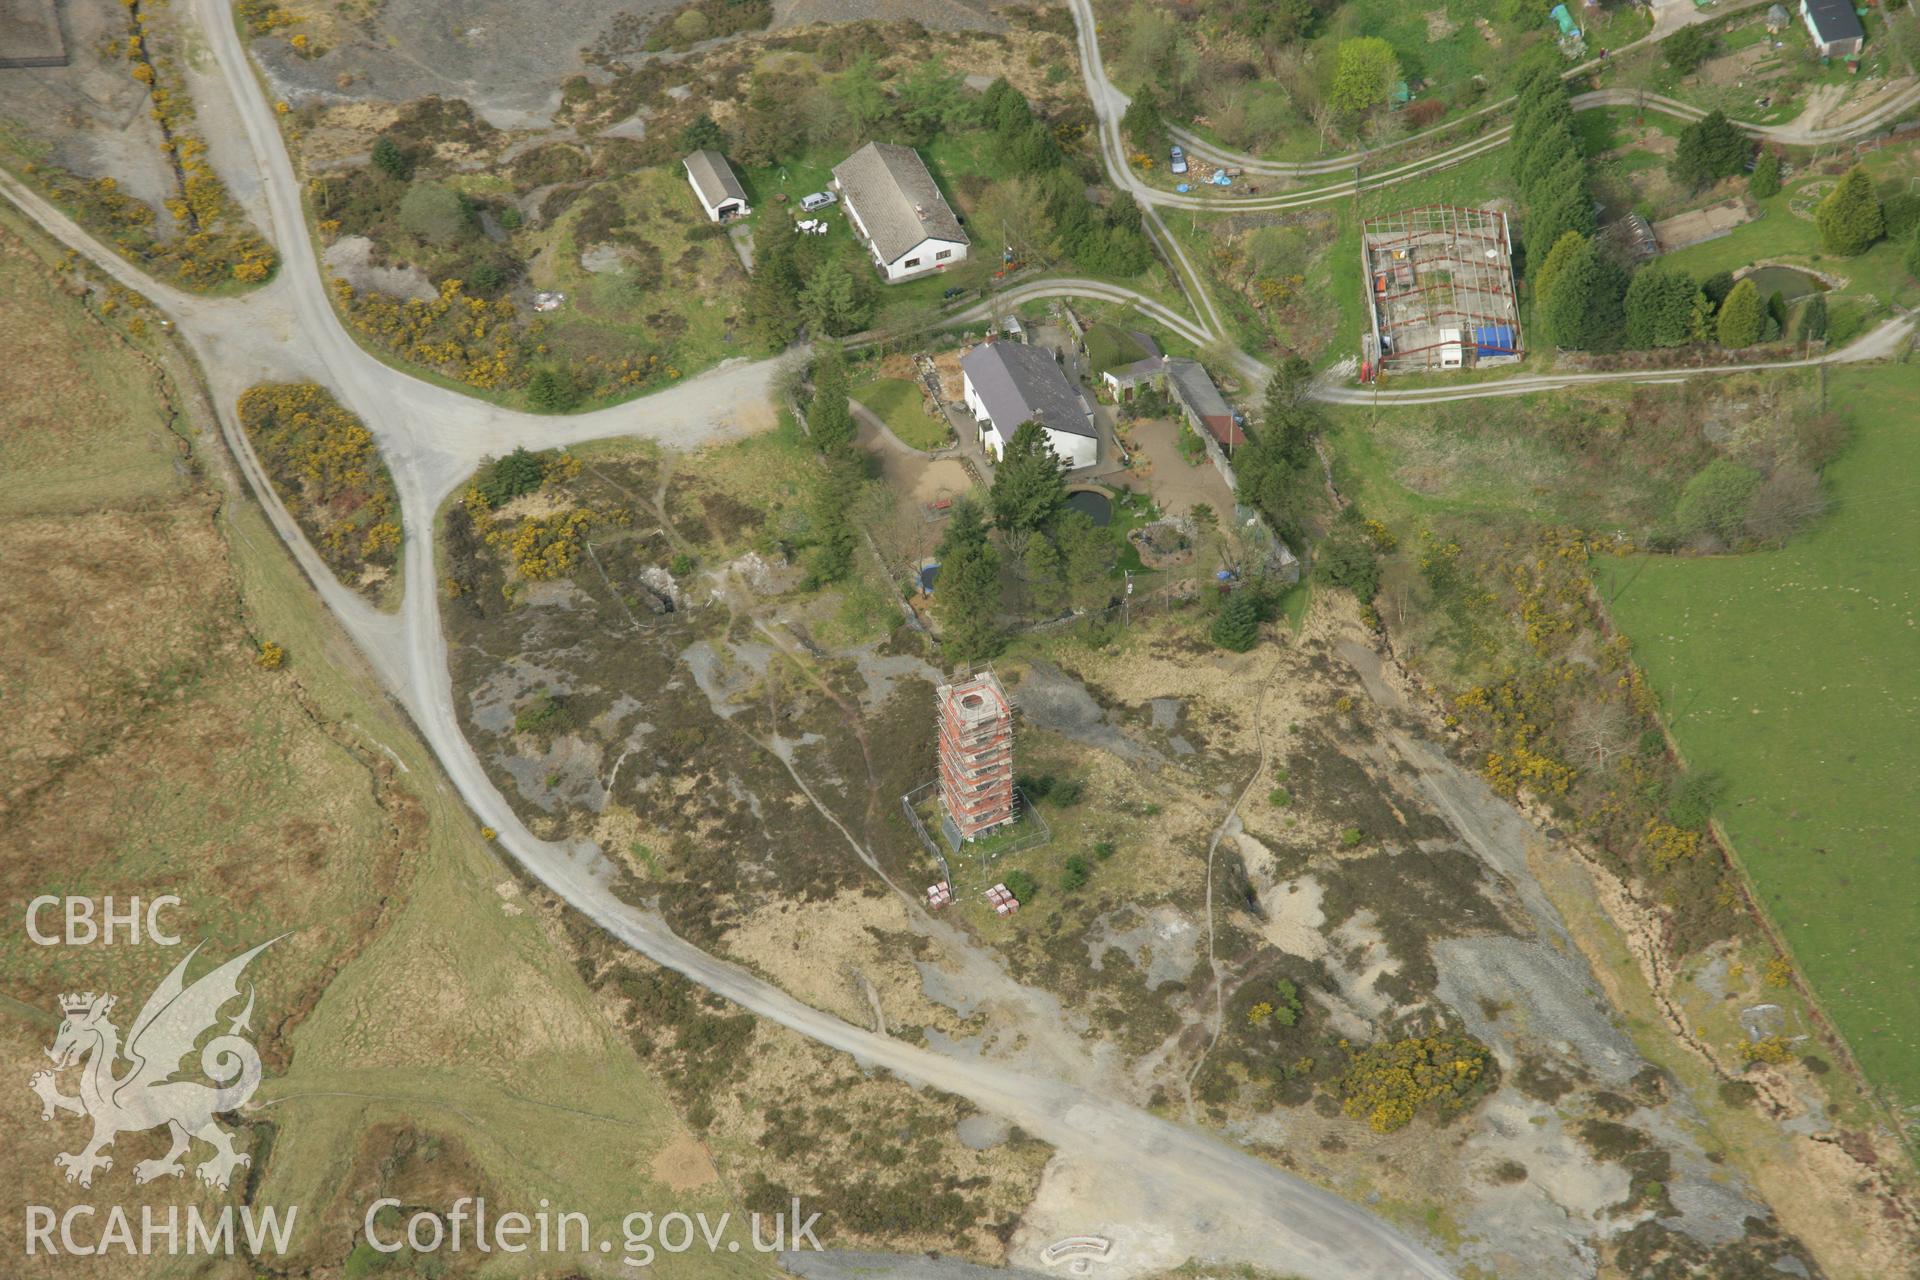 RCAHMW colour oblique aerial photograph of Cwmsymlog Lead Mine. Taken on 17 April 2007 by Toby Driver